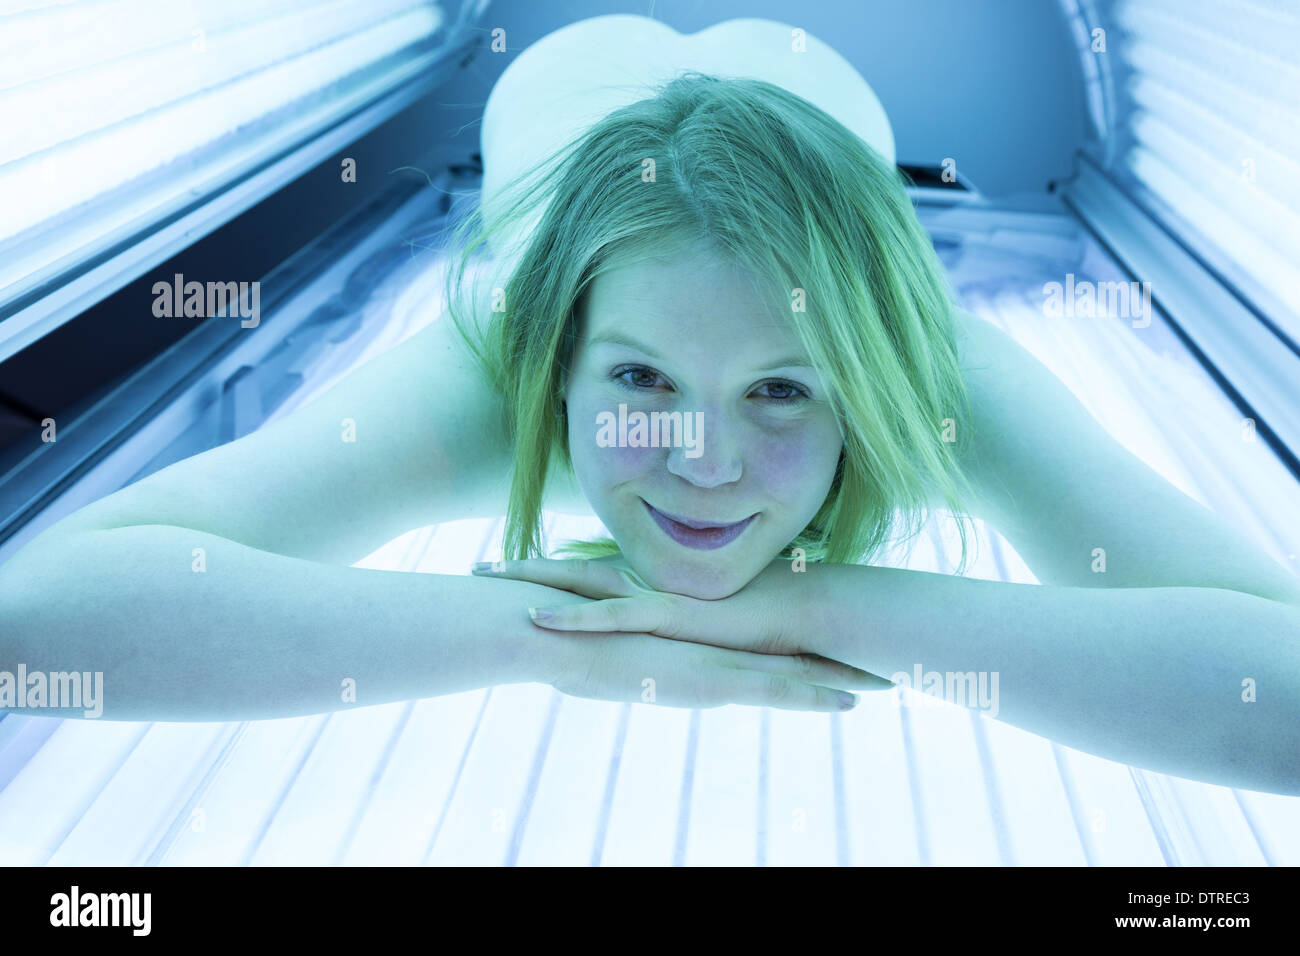 Naked Woman Relaxing On Tanning Bed In Solarium Stock Photo Alamy